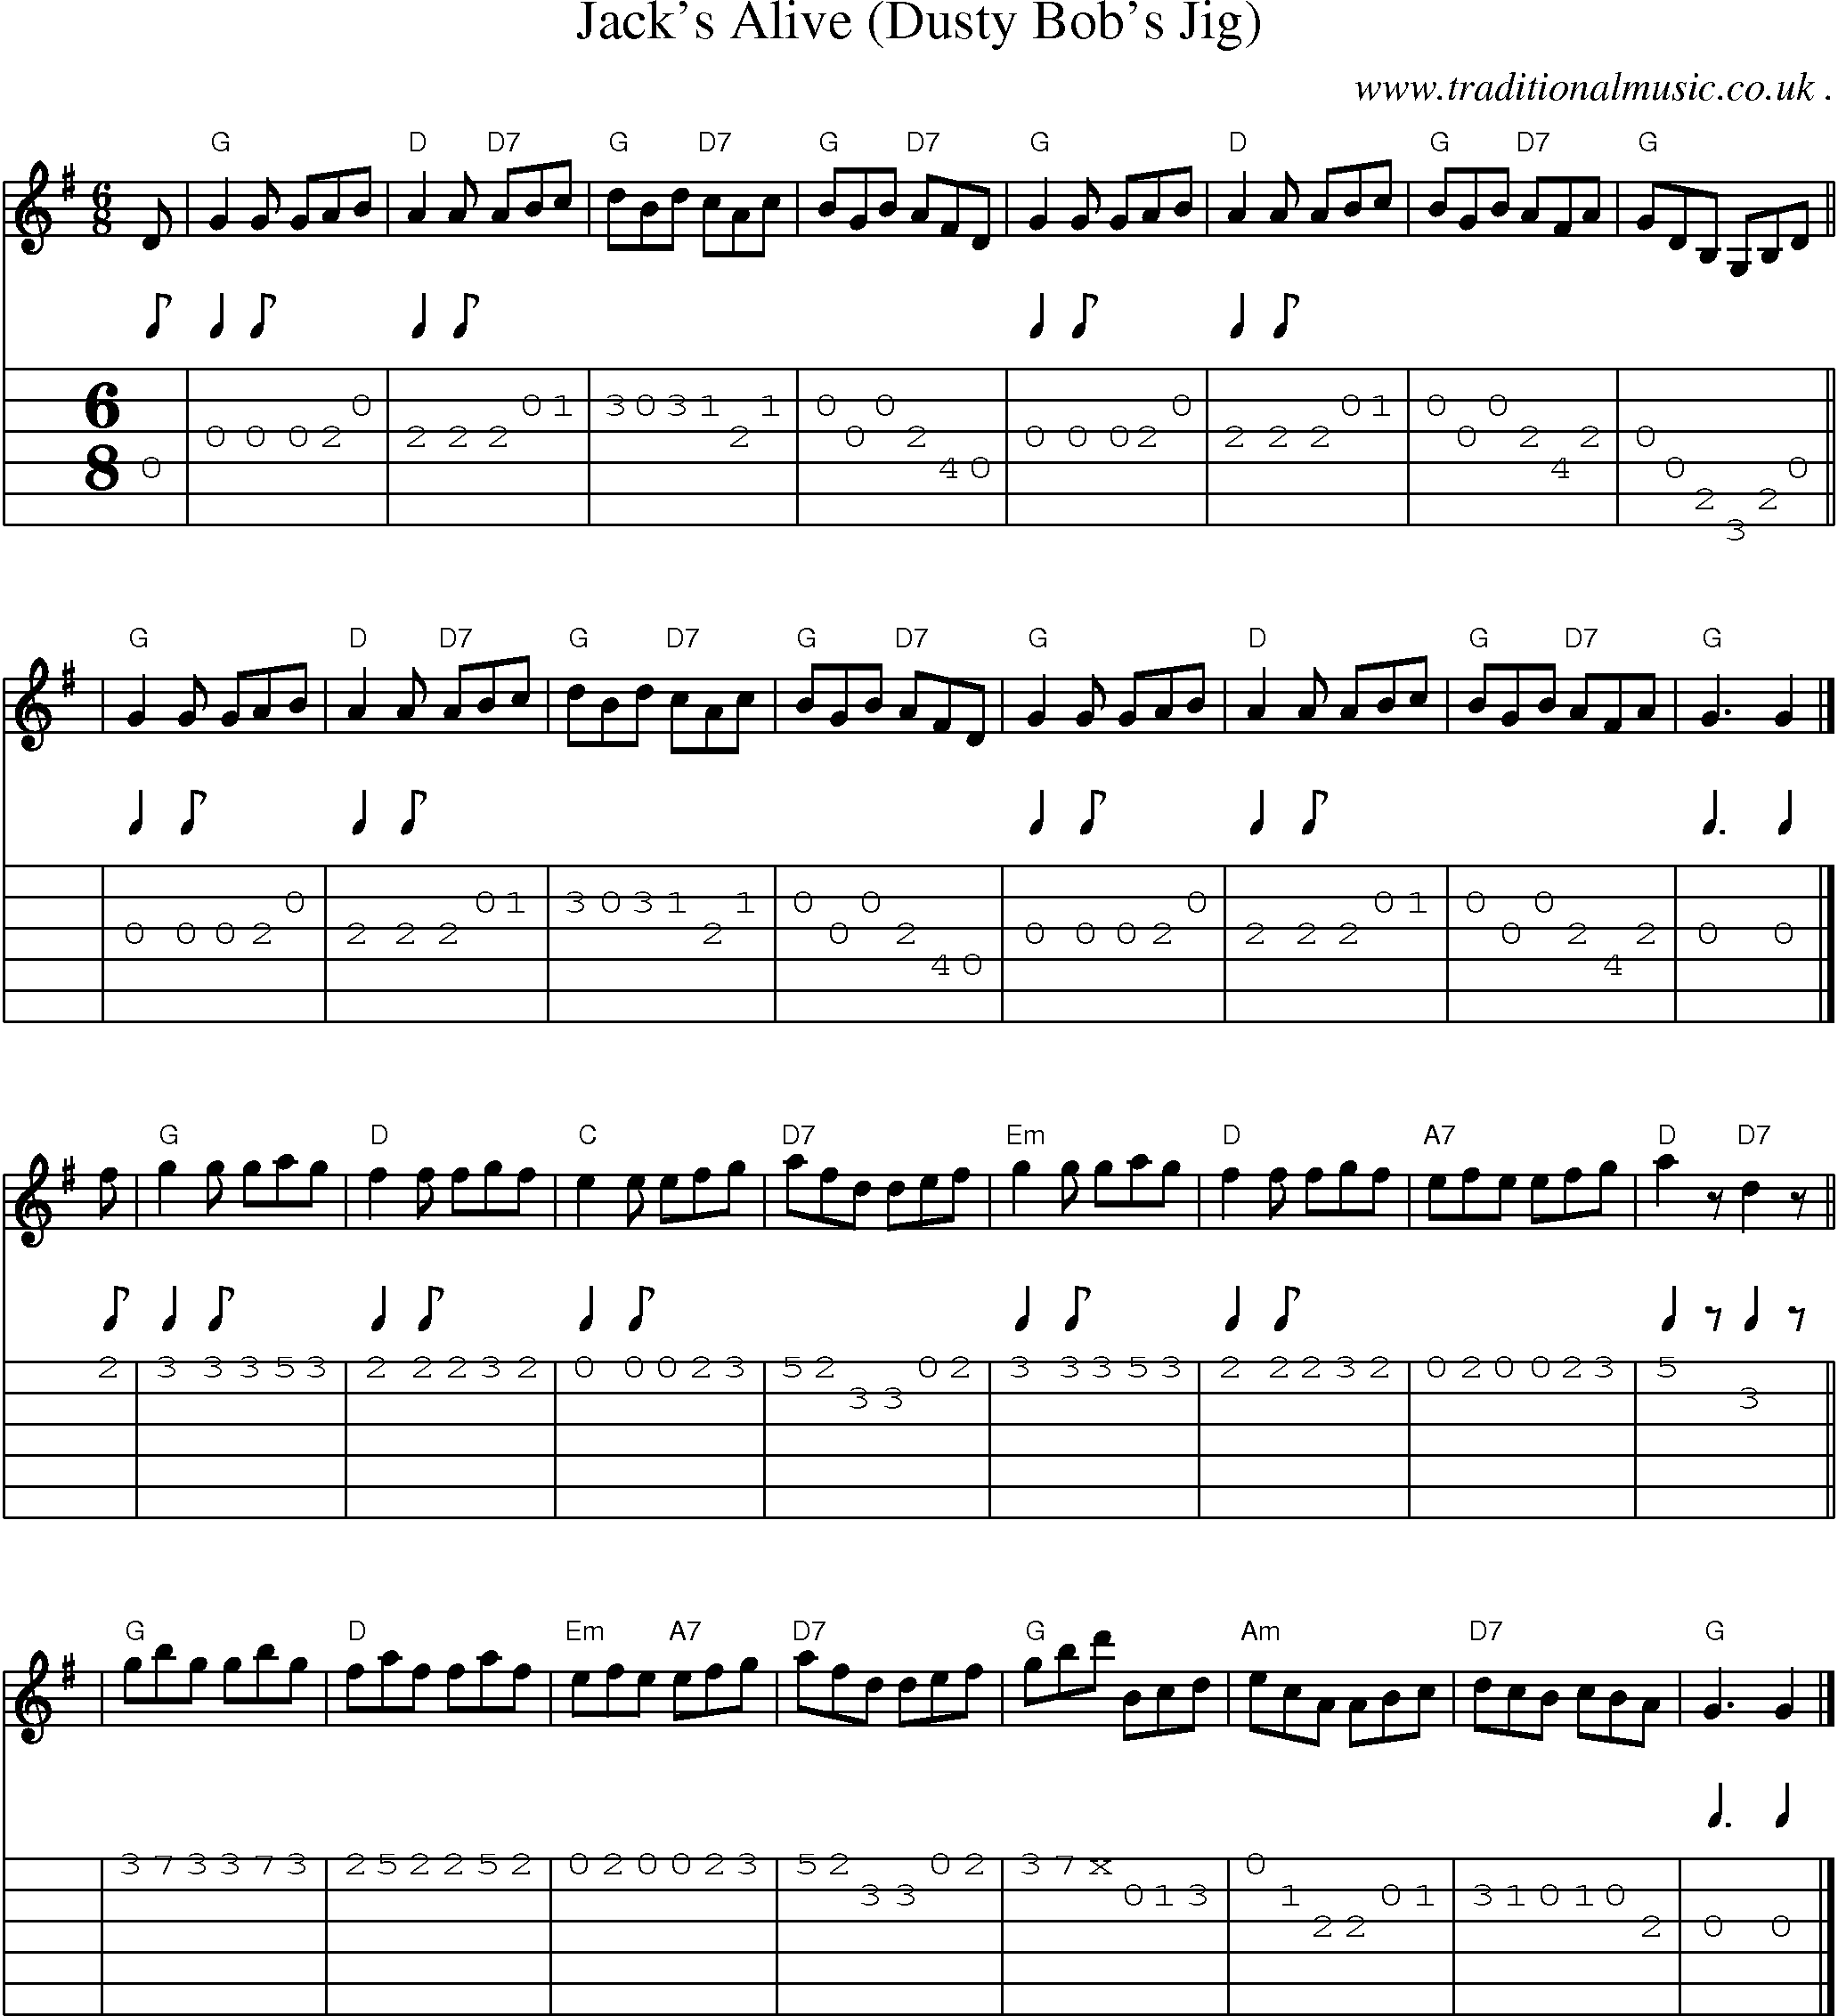 Sheet-music  score, Chords and Guitar Tabs for Jacks Alive Dusty Bobs Jig